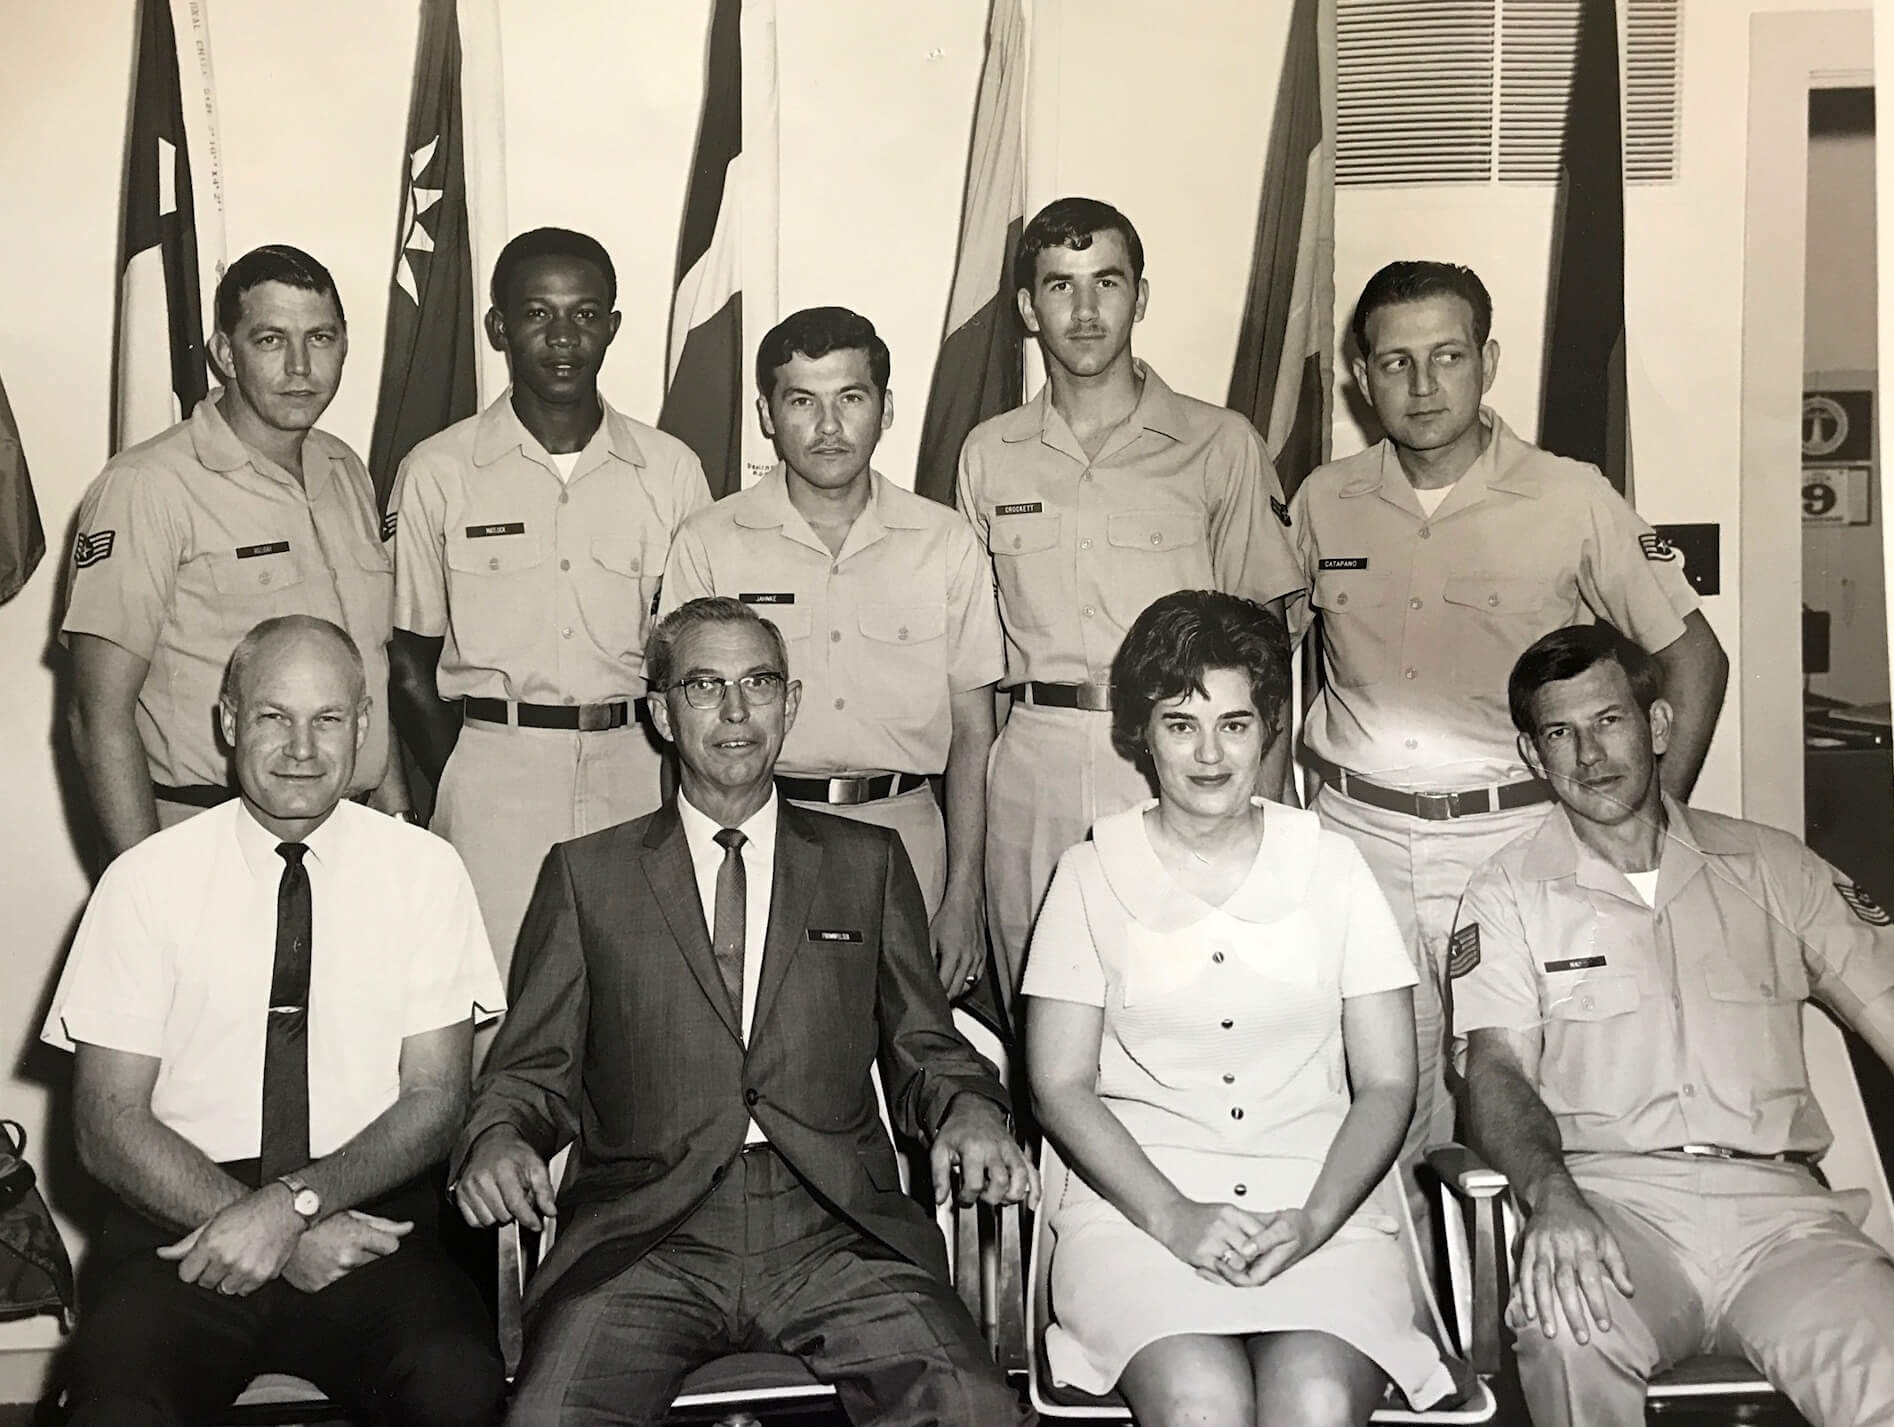 Portrait of a group of U.S. soldiers and admin.